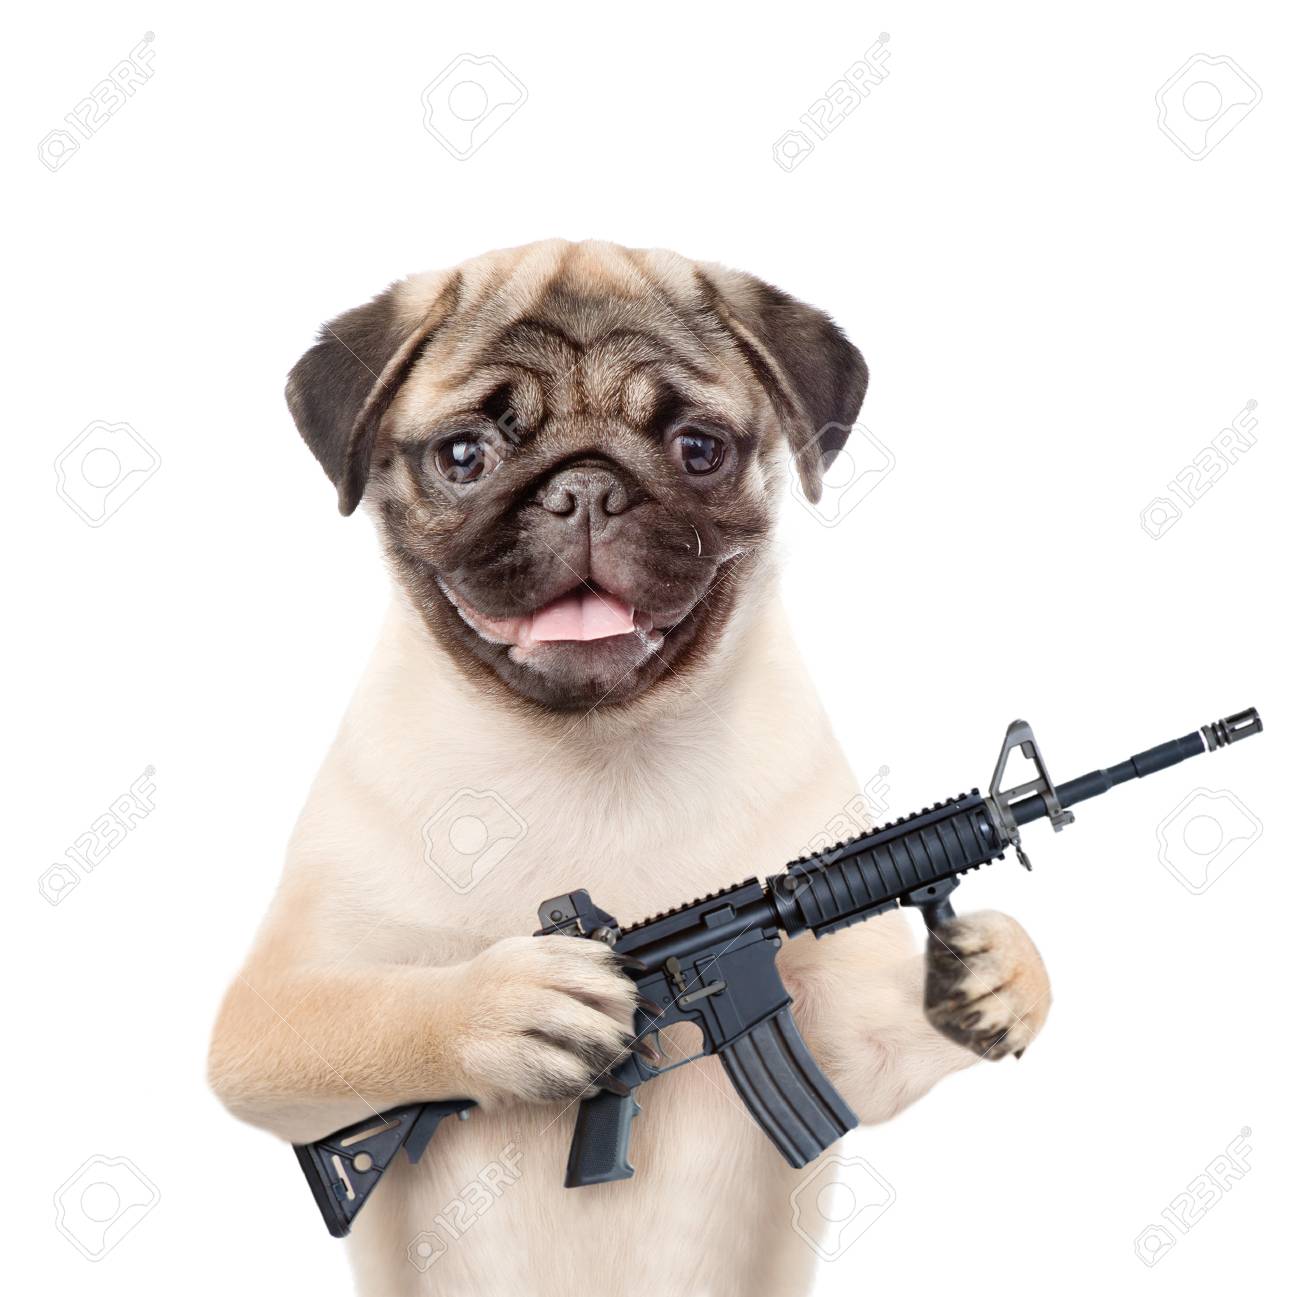 Dog Defender With M16 Rifle In Paws Isolated On White Background